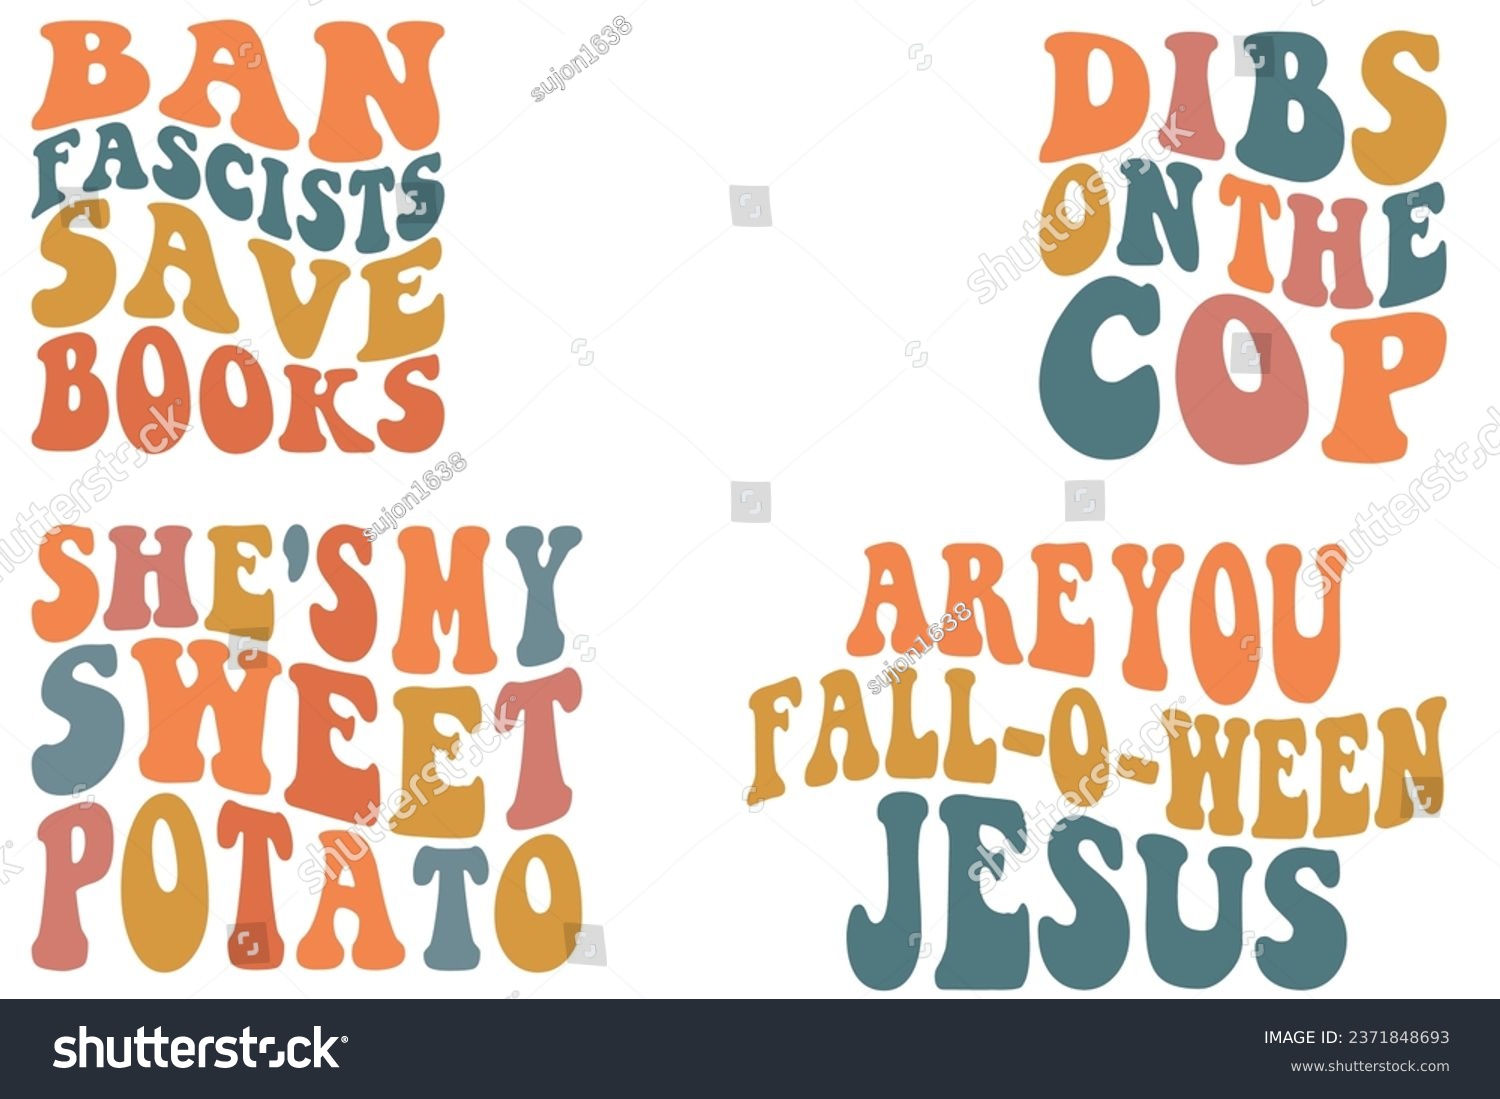 SVG of Ban Fascists Save Books, Dibs on the Cop, Are You Fall-O-Ween Jesus, she's my sweet potato retro wavy bundle T-shirt svg